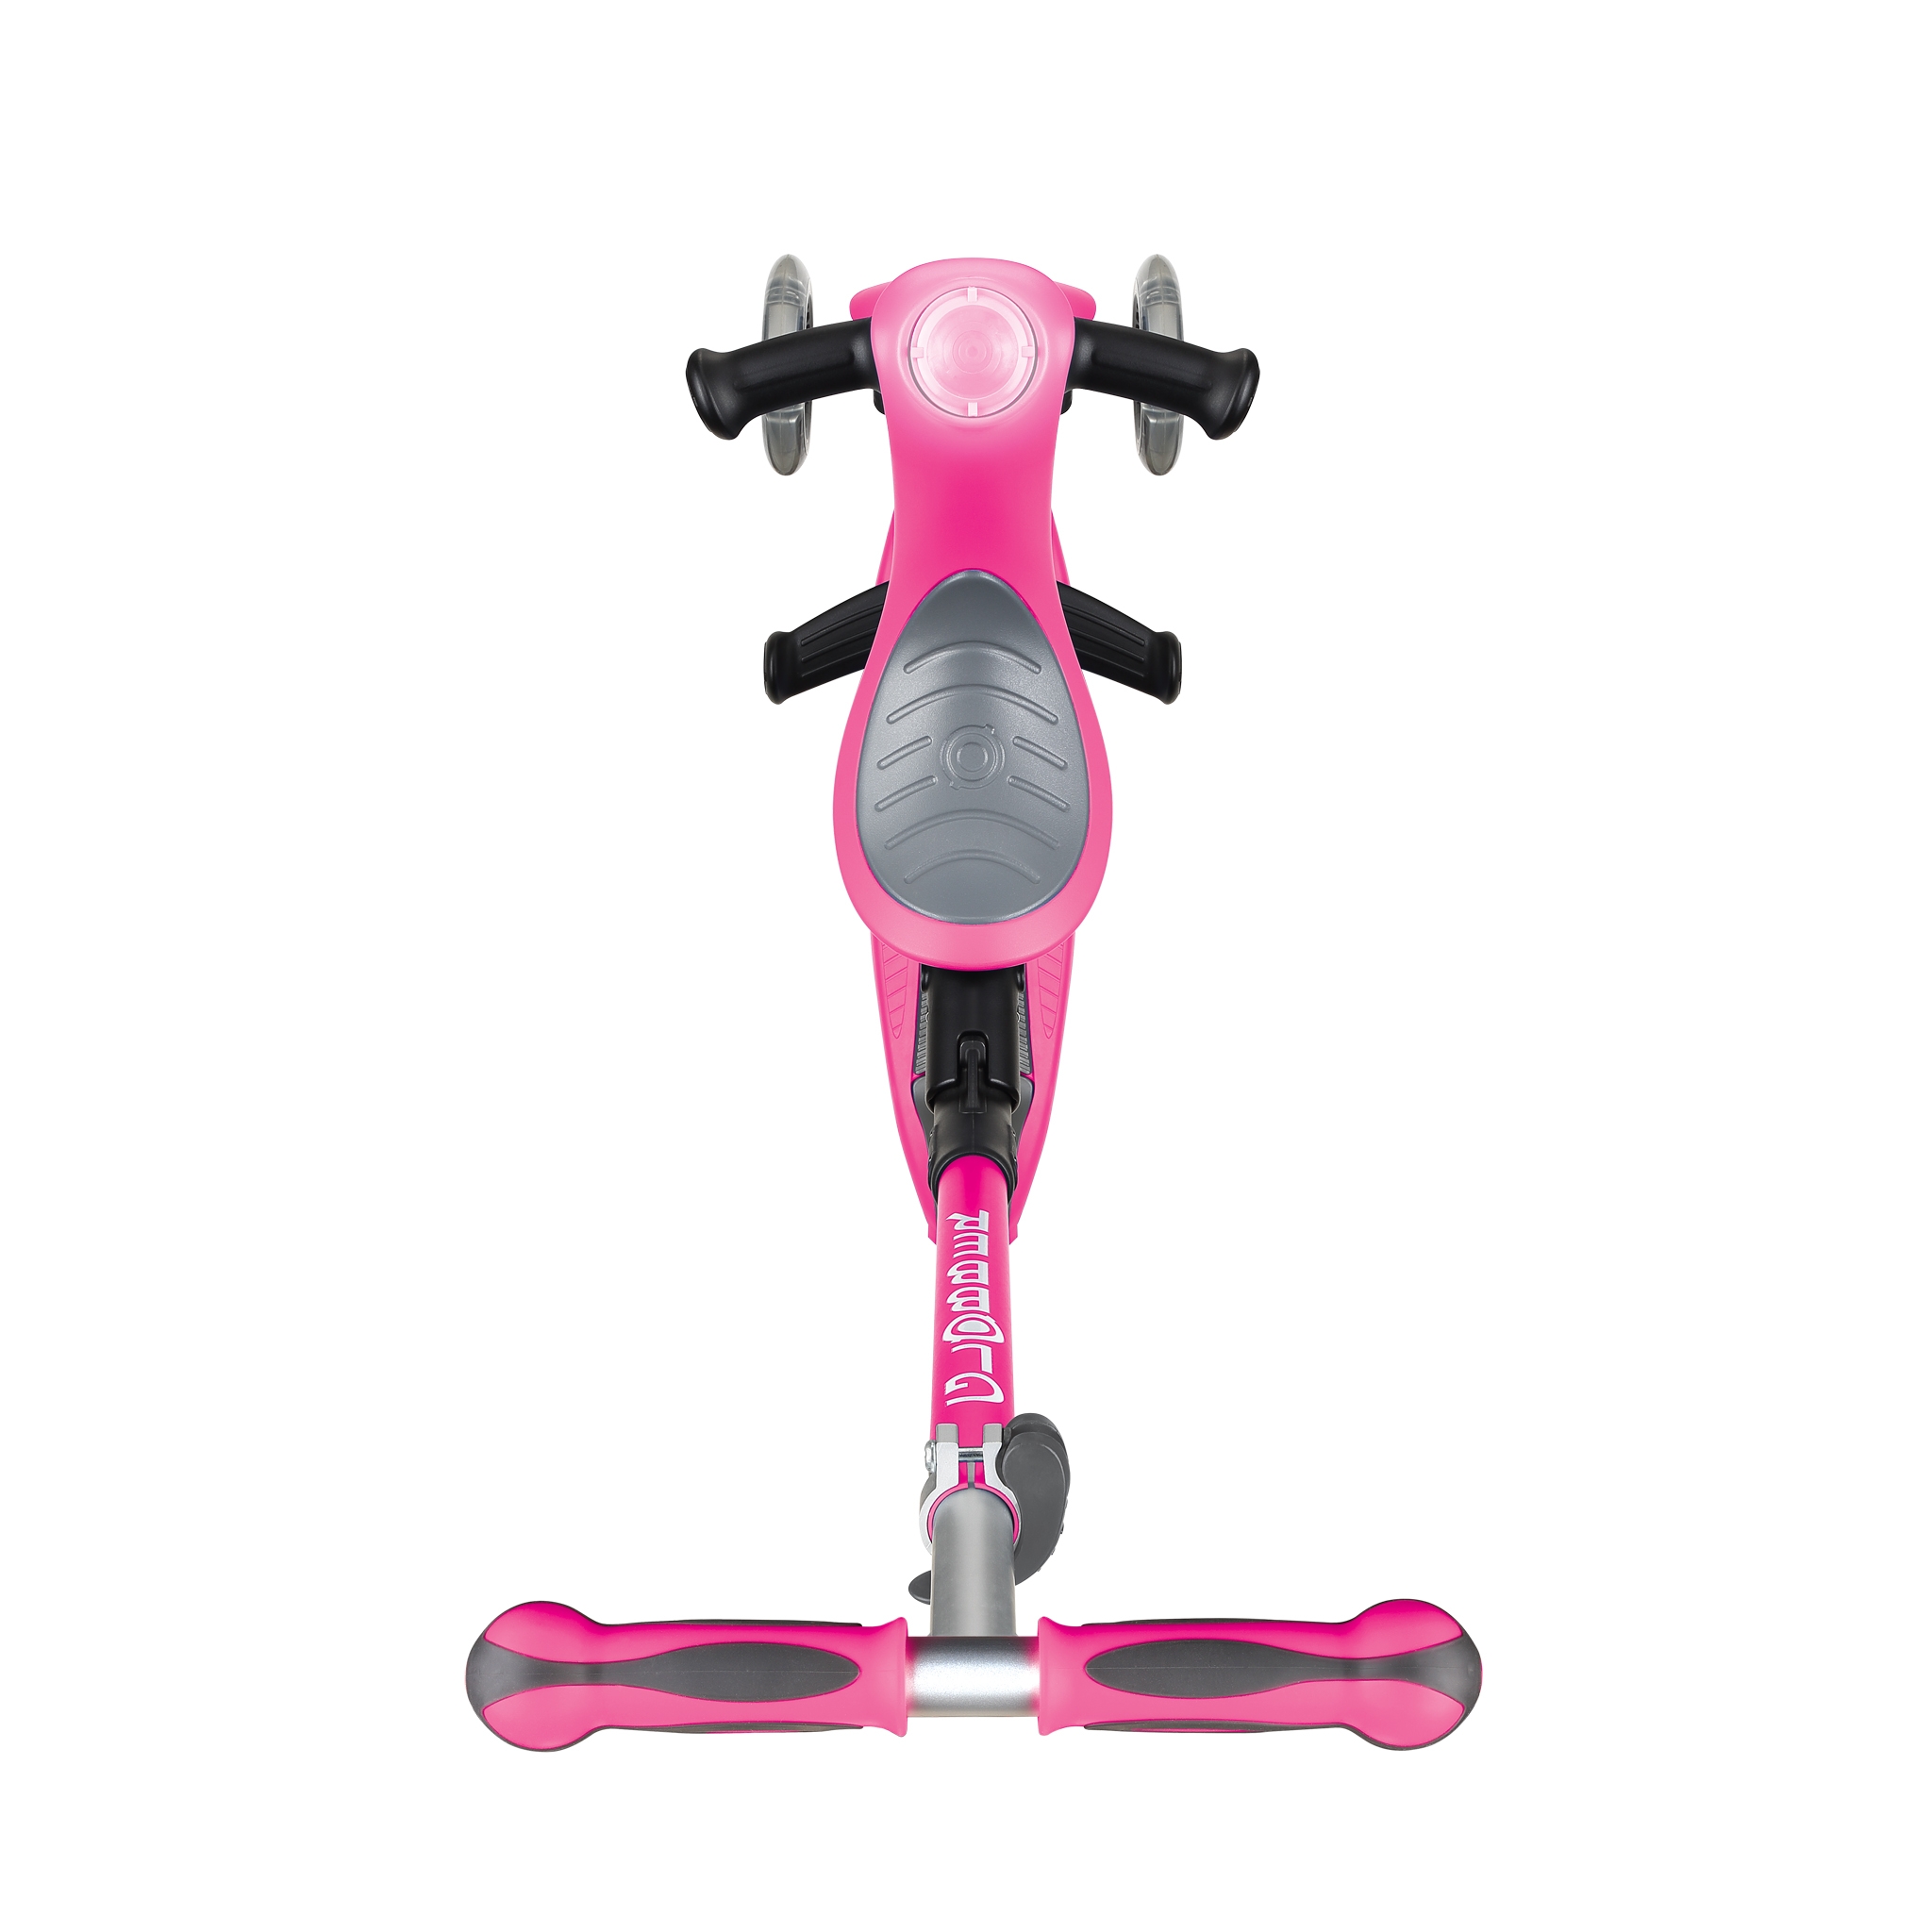 GO-UP-DELUXE-PLAY-ride-on-walking-bike-scooter-with-light-and-sound-module-and-extra-wide-3-height-adjustable-seat-deep-pink 2